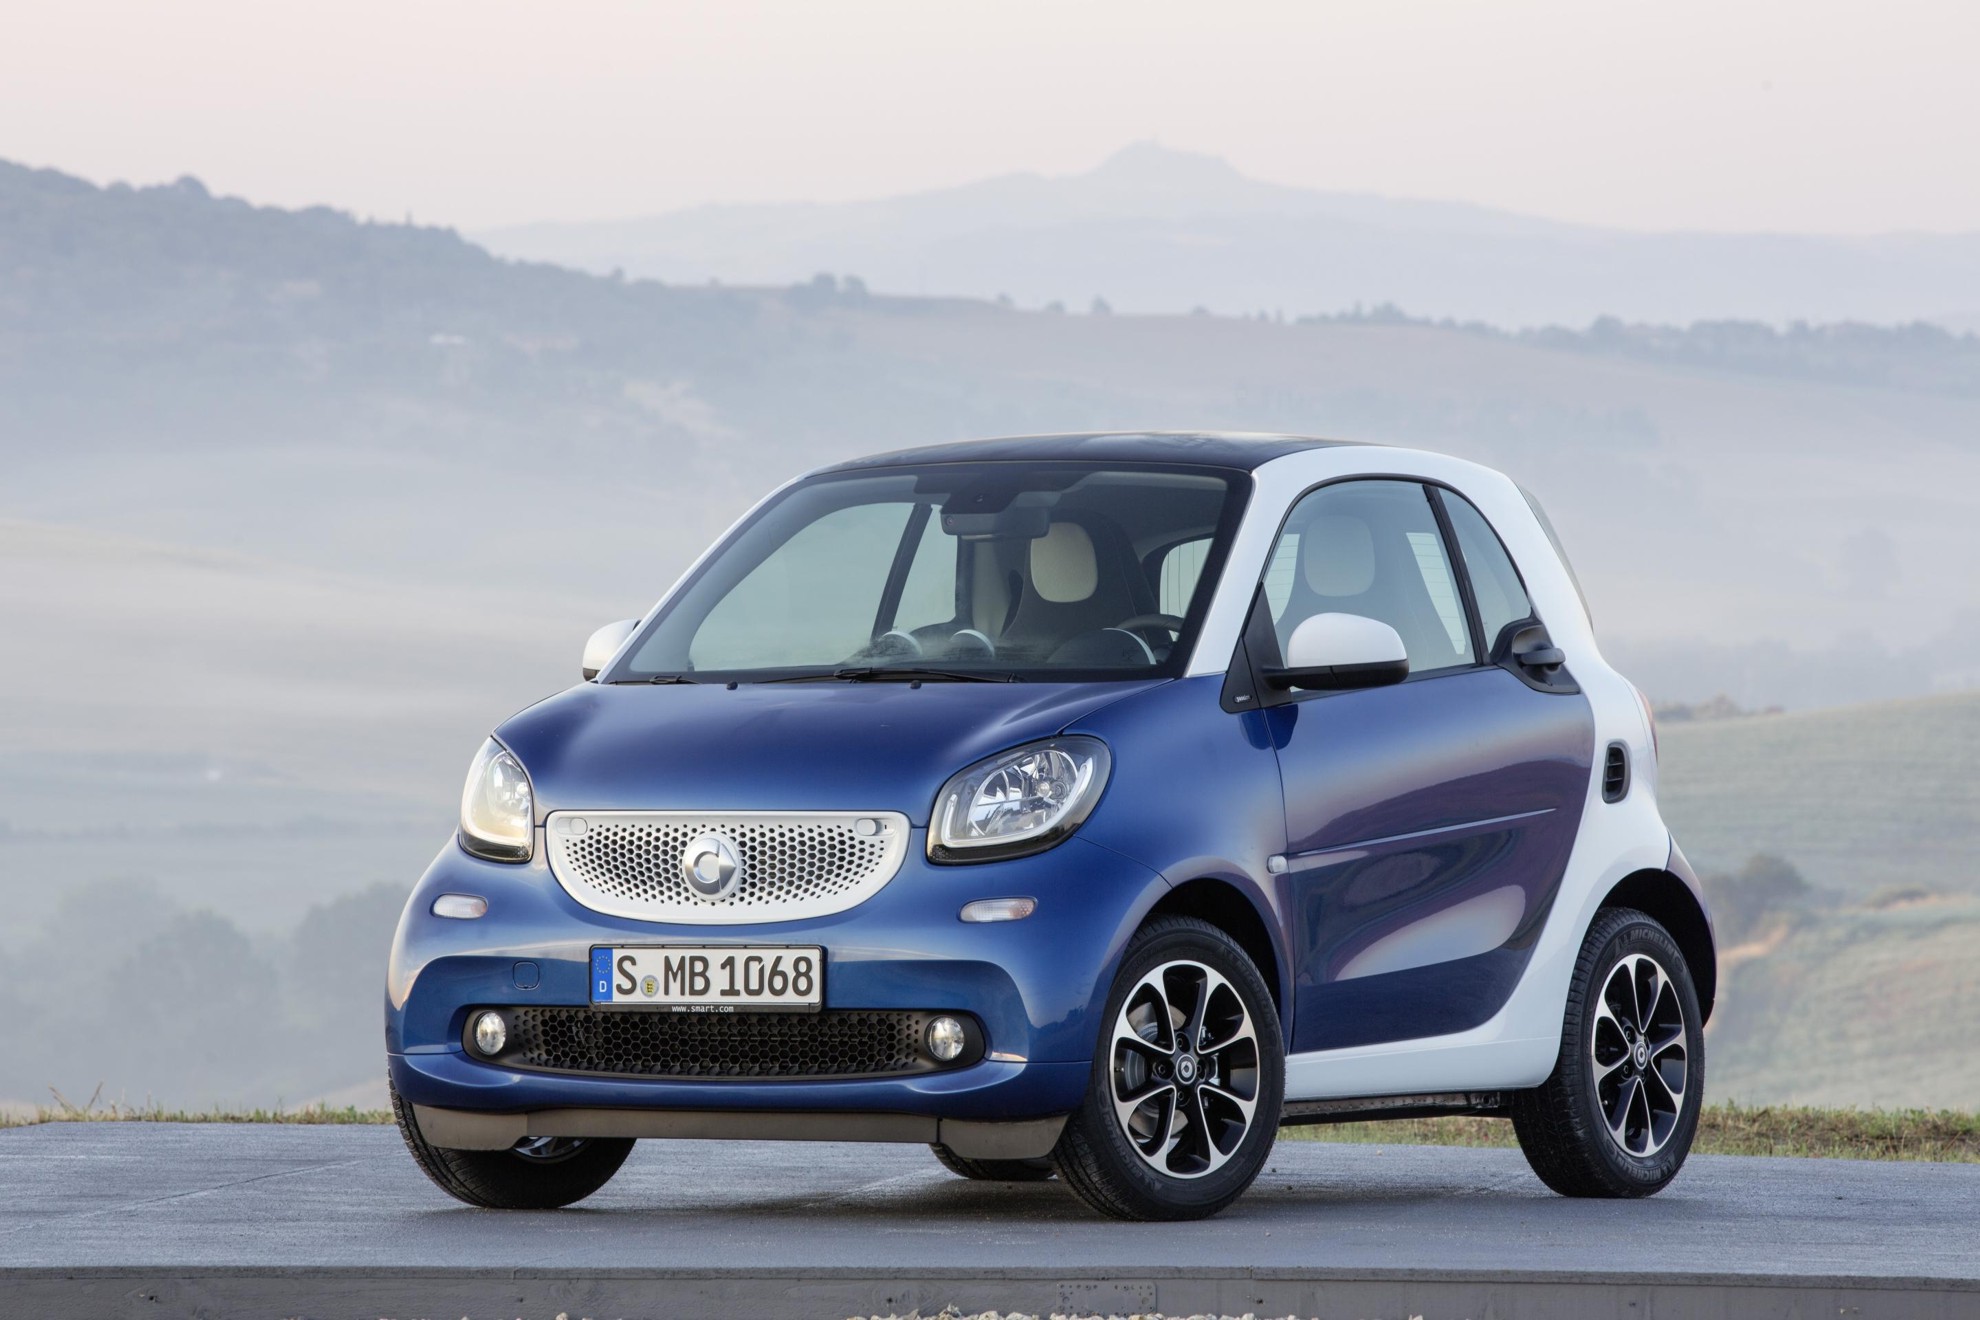 THE NEW SMART fortwo AND SMART forfour – BOTH FORYOU